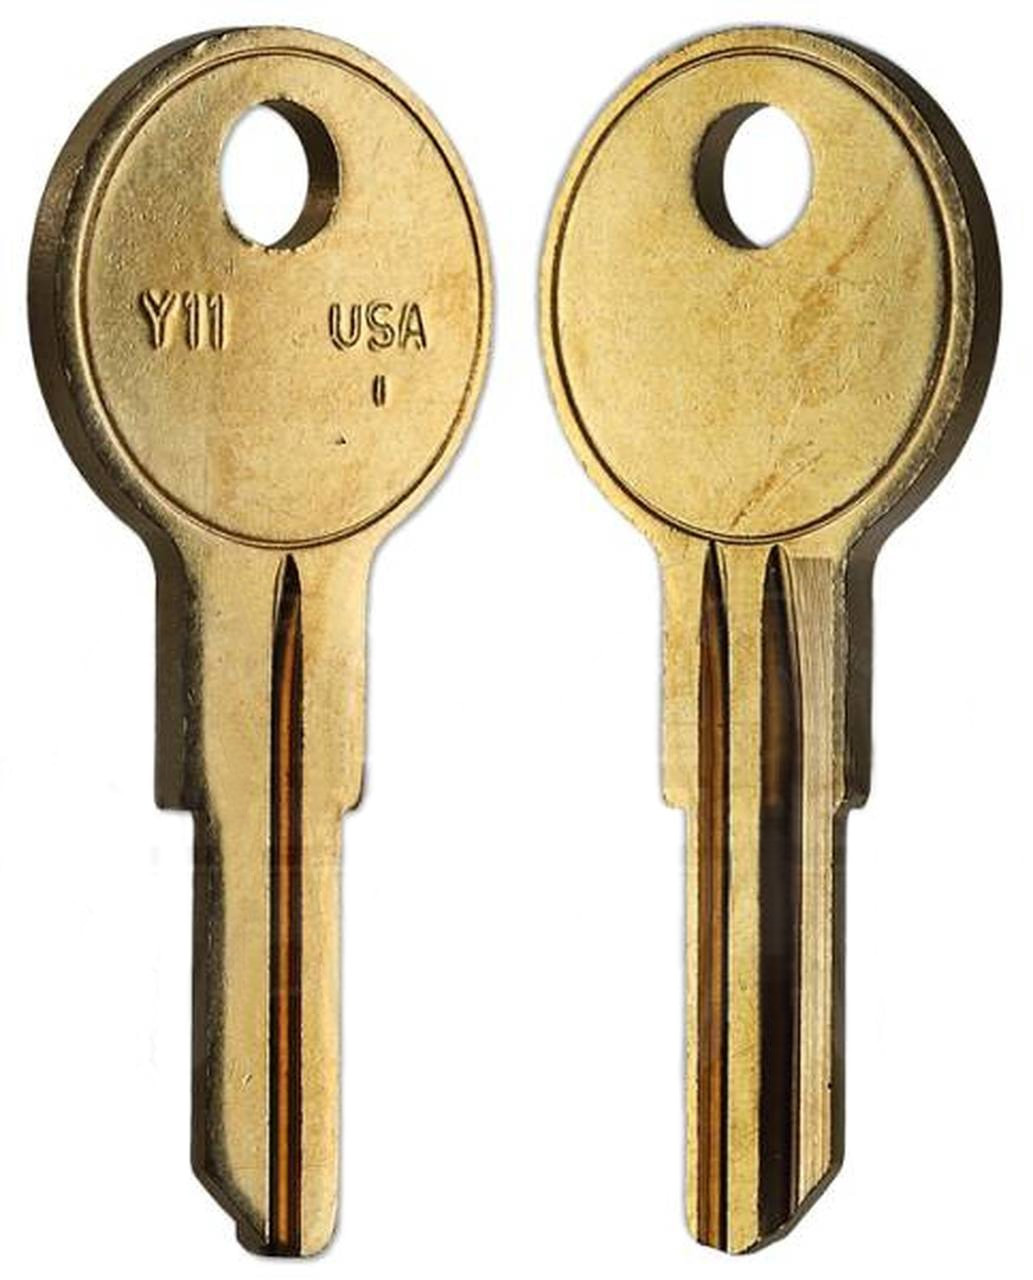 MOON Lock File Cabinet Replacement Key